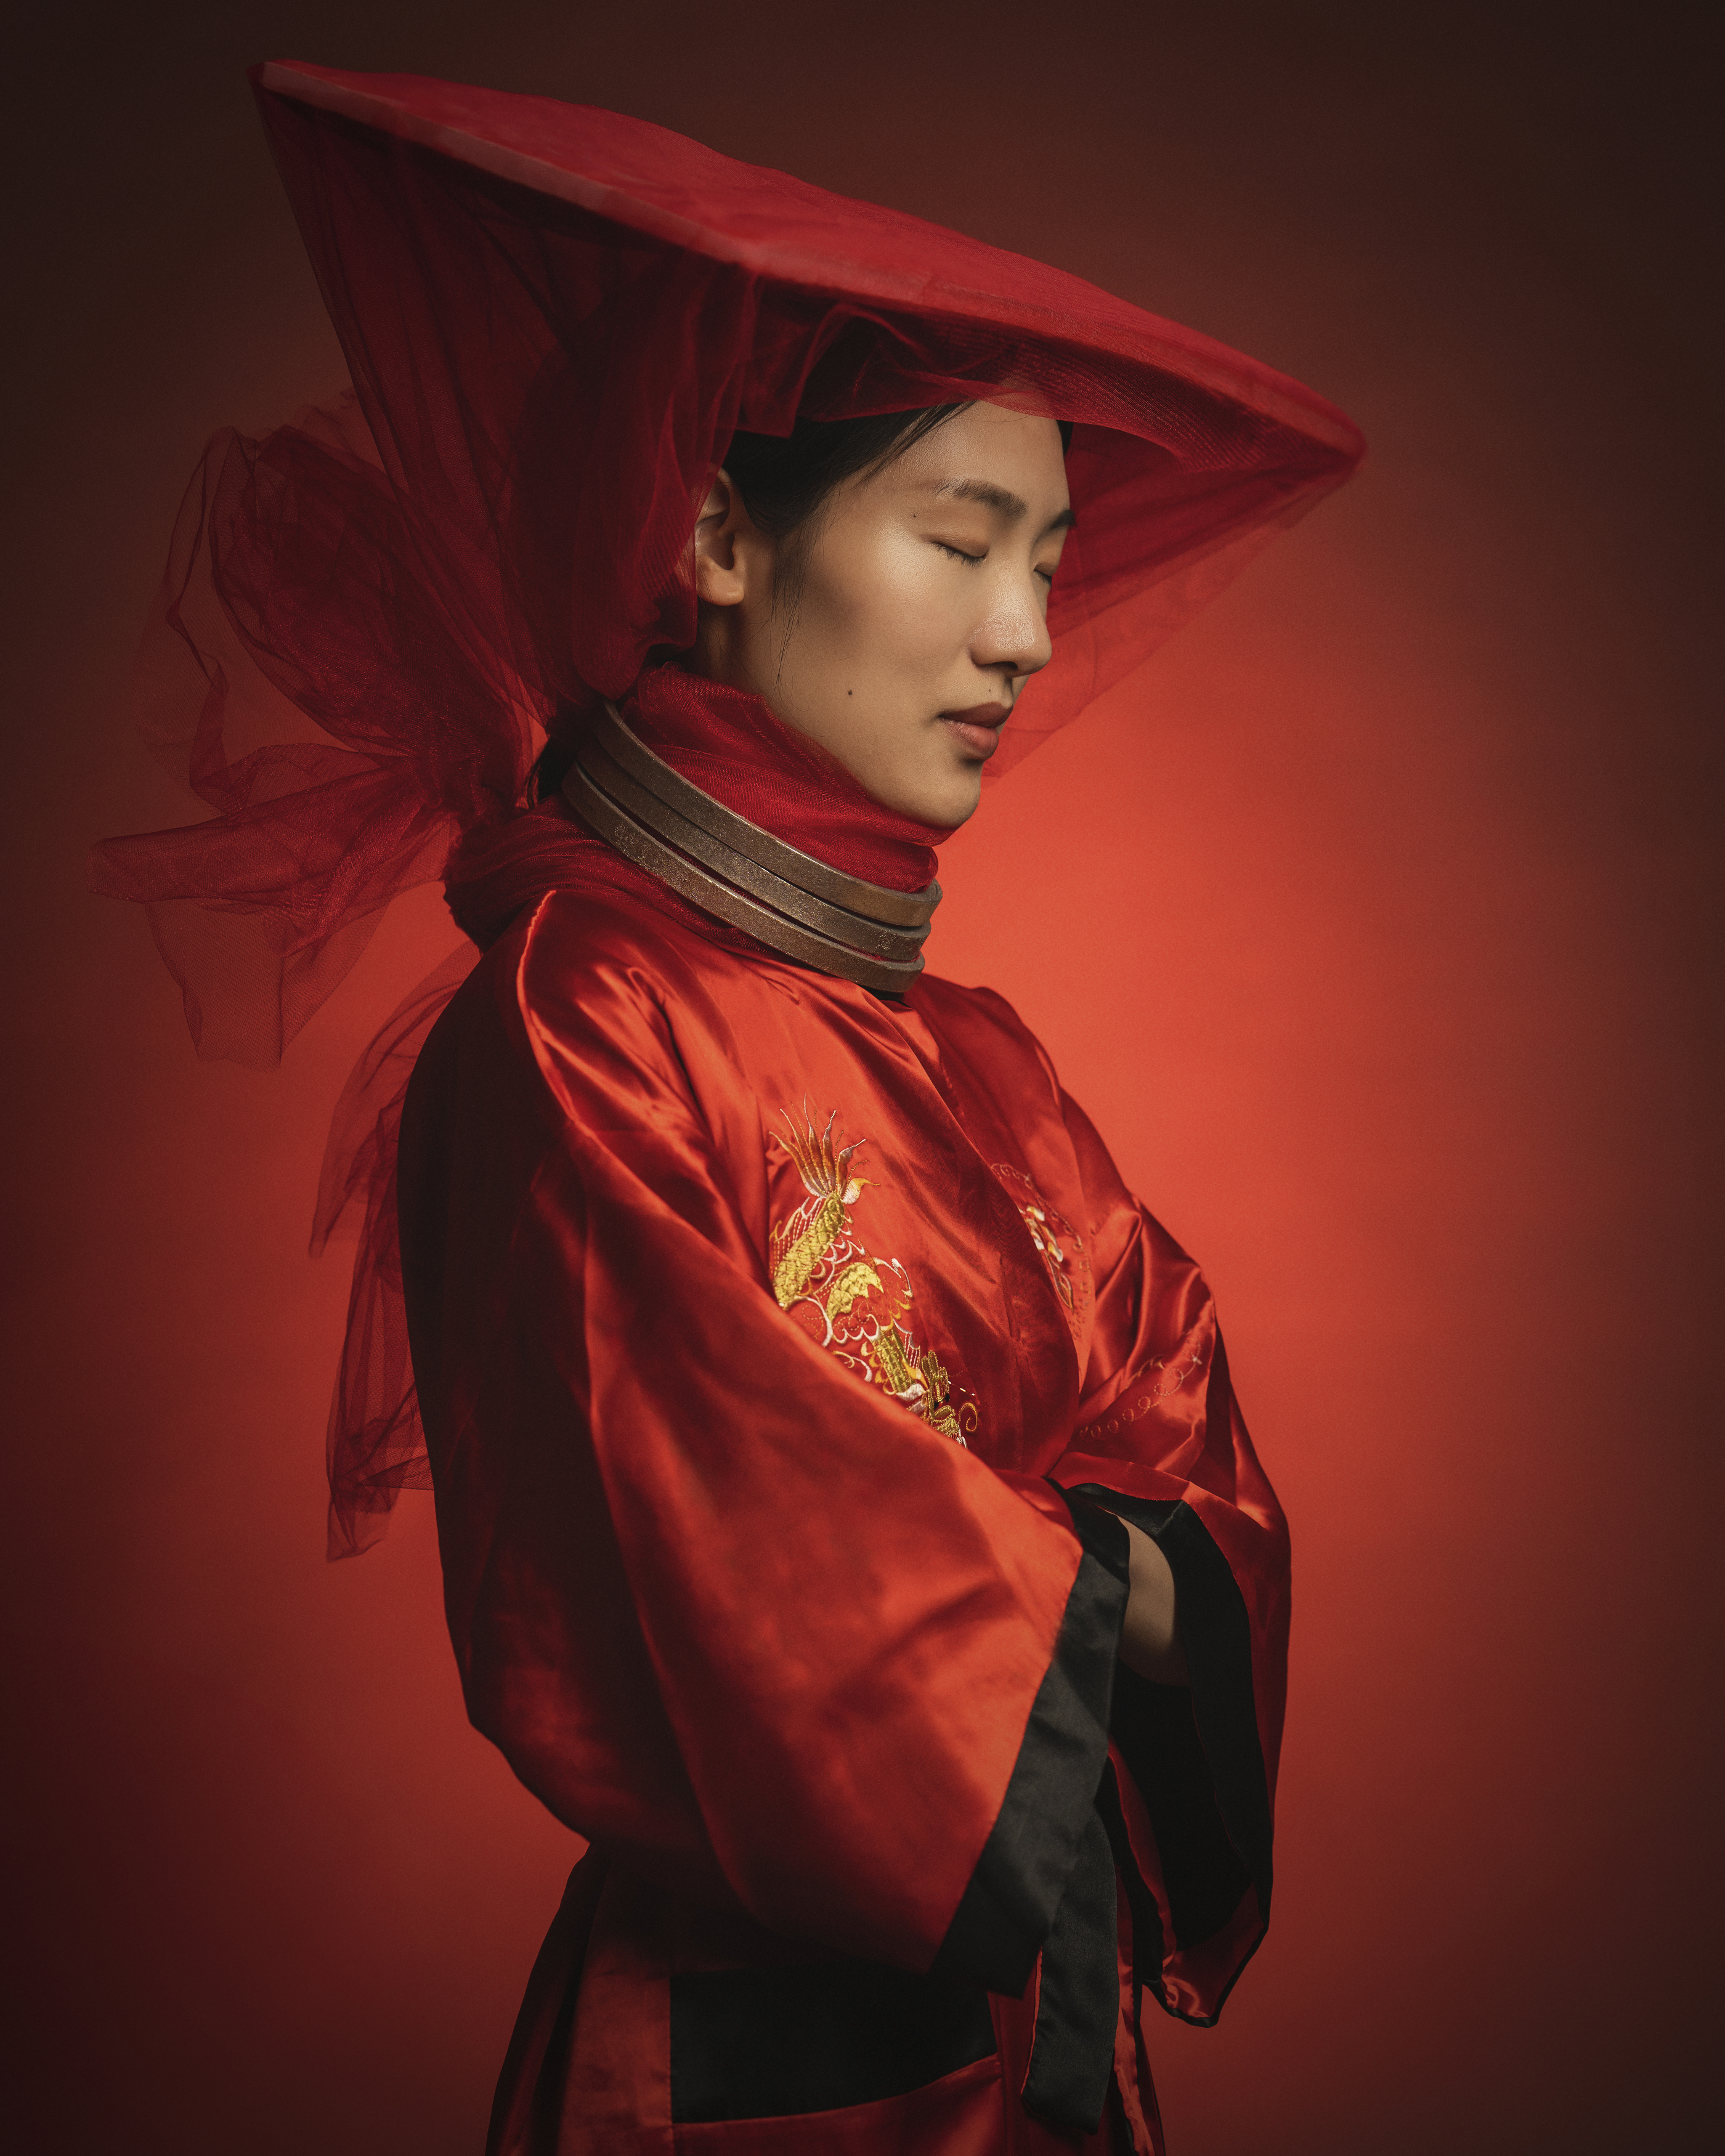 beautiful woman, beauty, chinese girl, dream, dress, elegance, fashion, female, femininity, hat, individuality, indoors, lifestyles, light, one person, portrait, pose, shadow, side view, standing, studio shot, traditional clothing, young woman, Alex Tsarfin